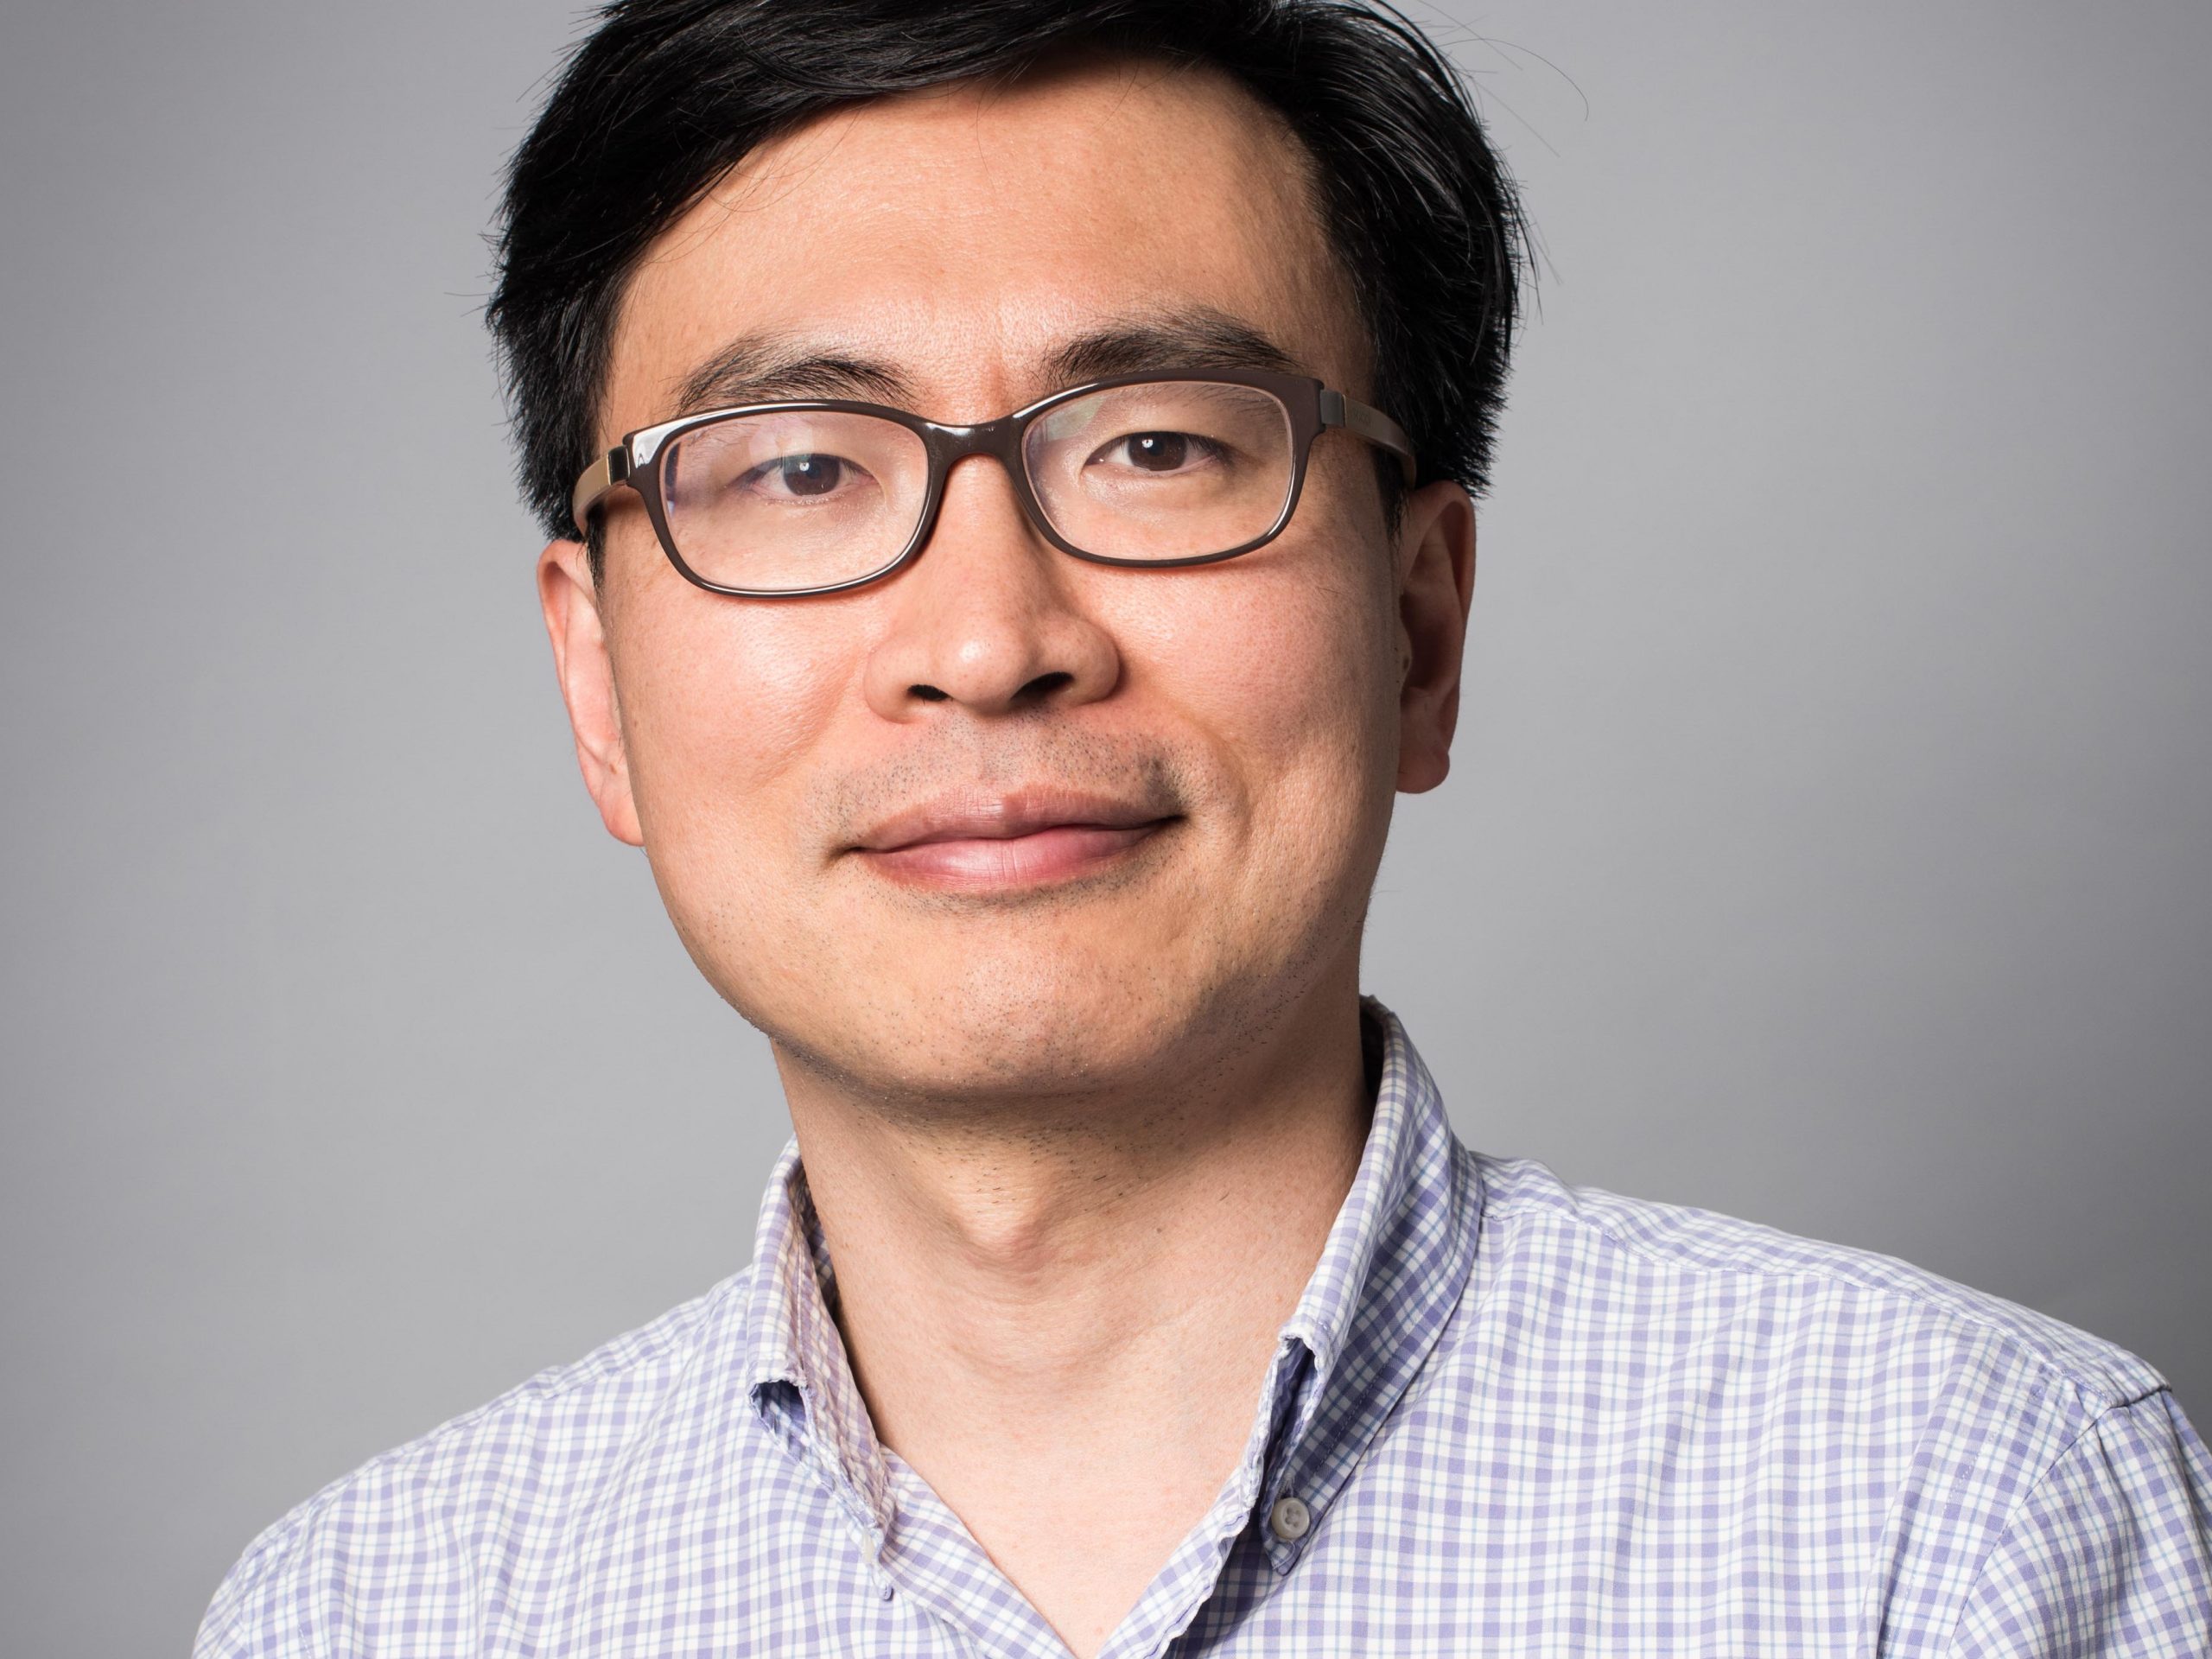 Prof. Han has used AI to ascertain land and CBD floorspace use, property values and more. Next, he’s keen to apply it to agrifood freight logistics and decision-making.